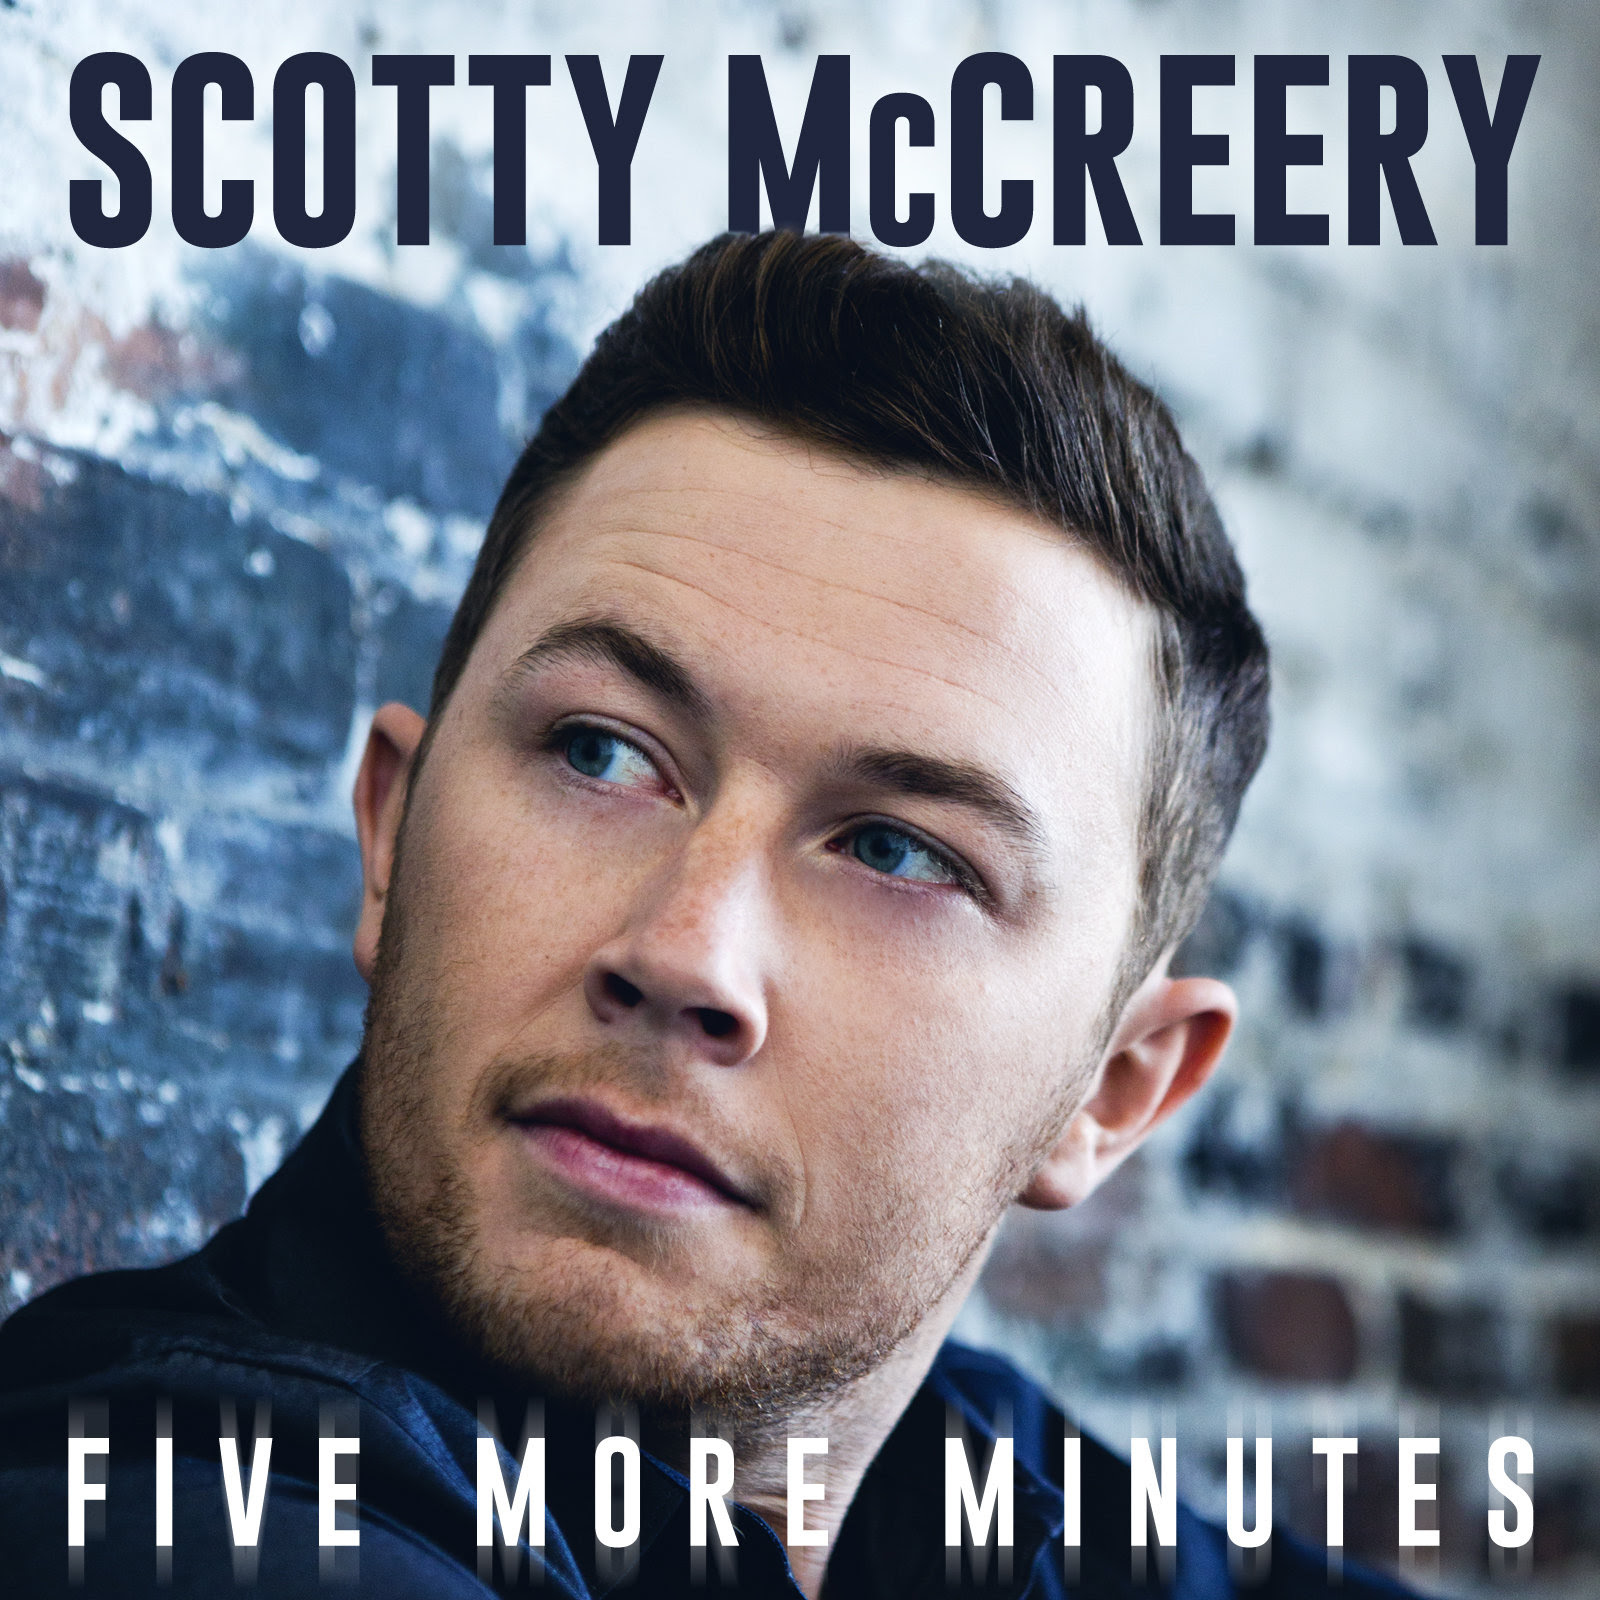 Scotty McCreery’s “Five More Minutes” Goes No. 1!